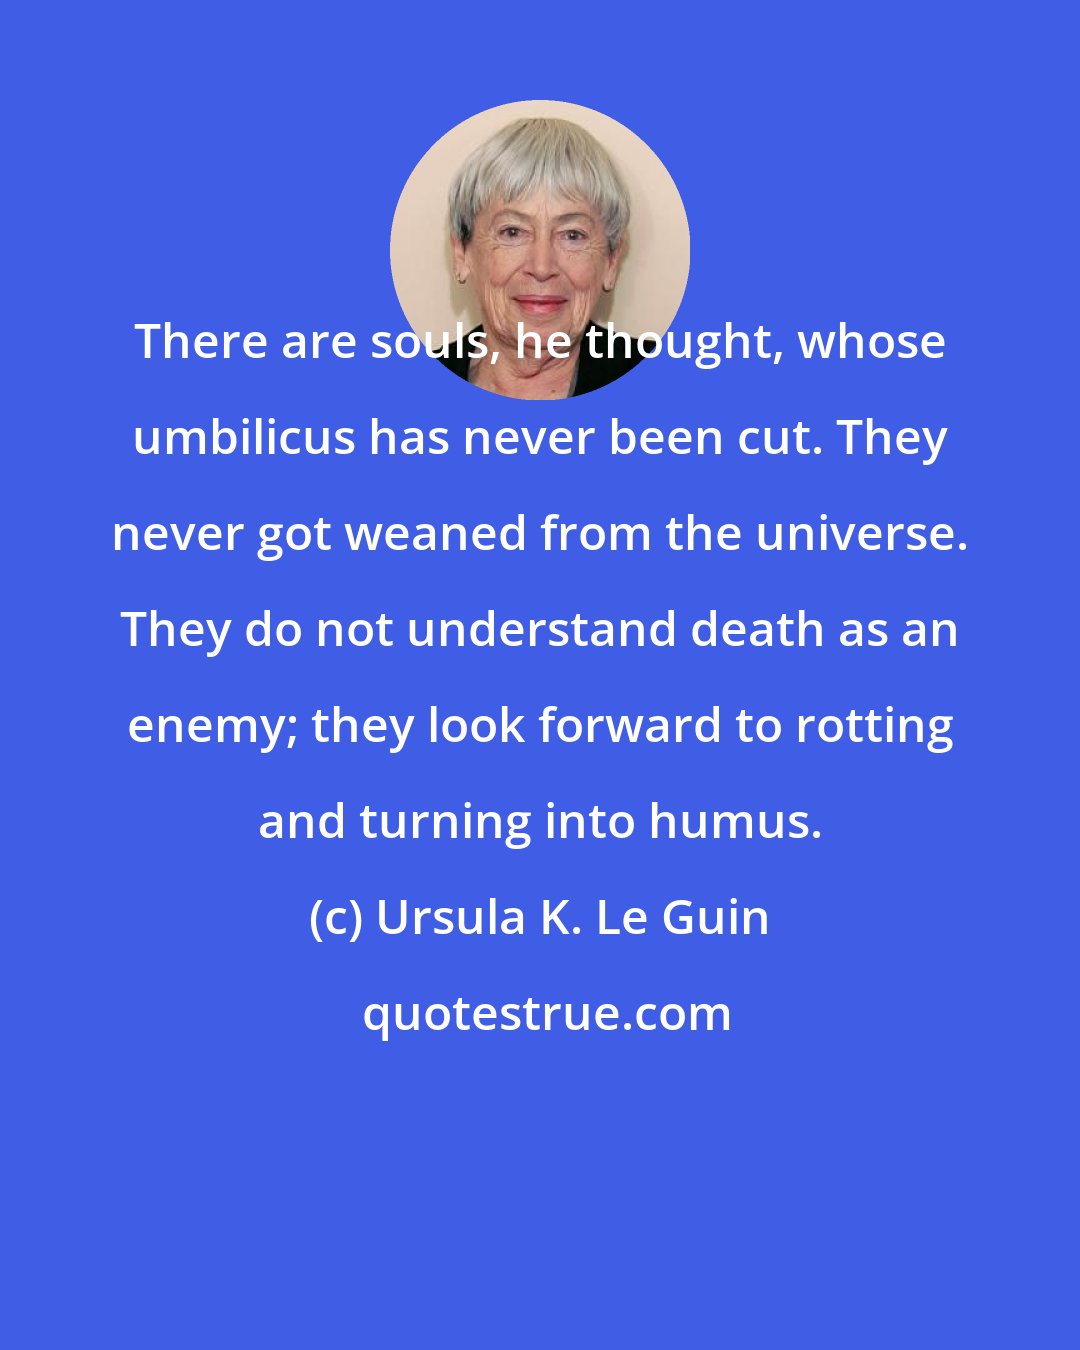 Ursula K. Le Guin: There are souls, he thought, whose umbilicus has never been cut. They never got weaned from the universe. They do not understand death as an enemy; they look forward to rotting and turning into humus.